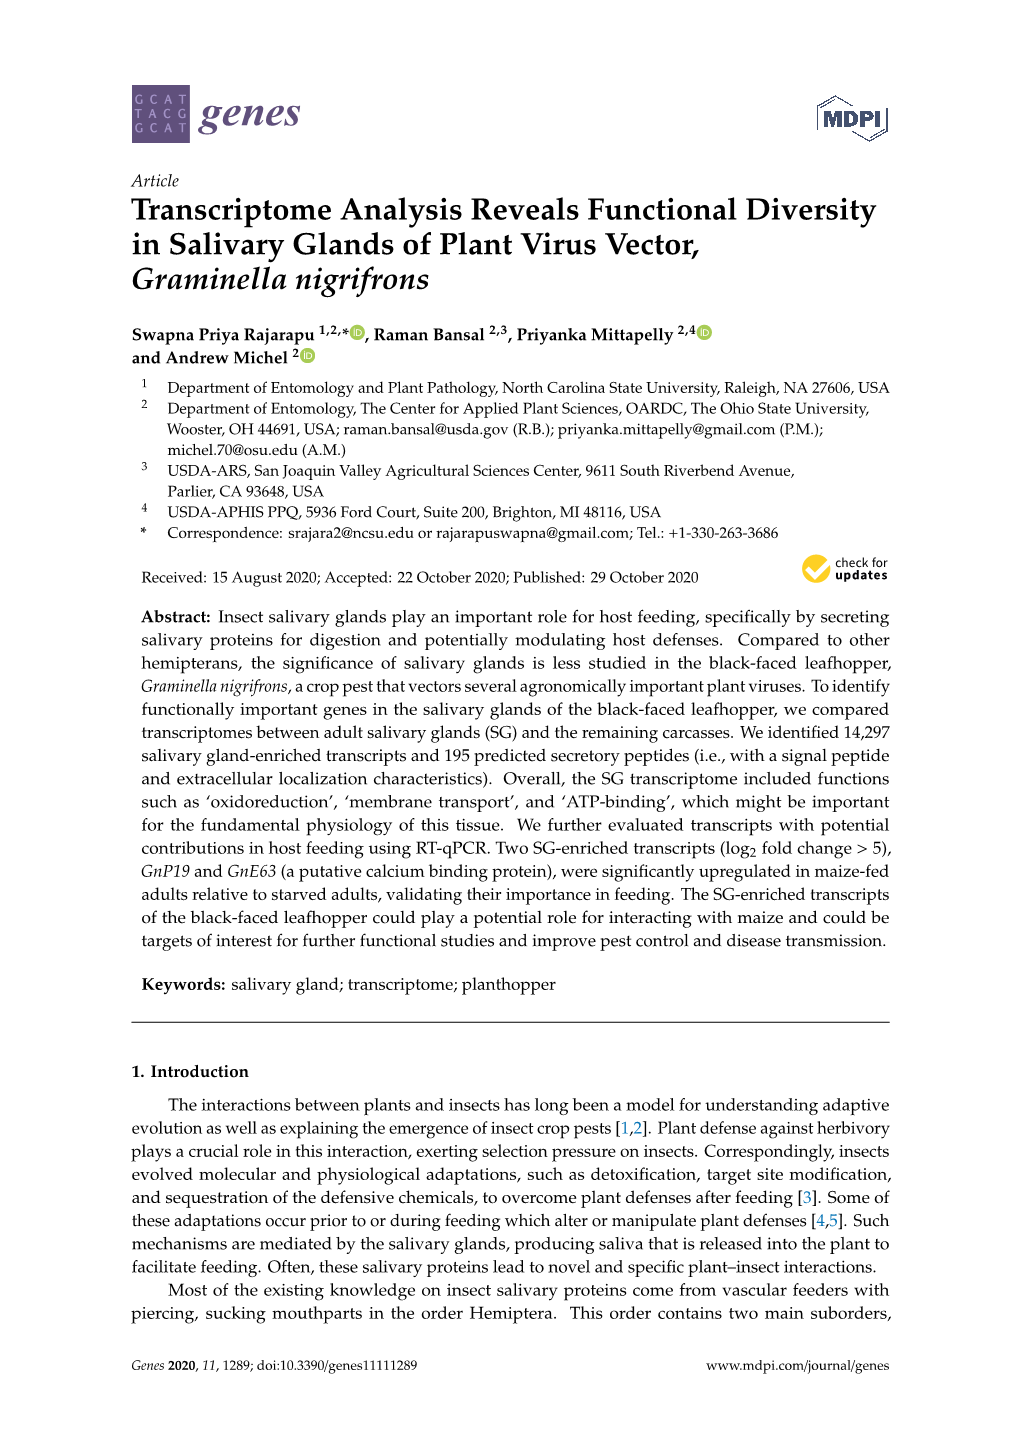 Transcriptome Analysis Reveals Functional Diversity in Salivary Glands of Plant Virus Vector, Graminella Nigrifrons